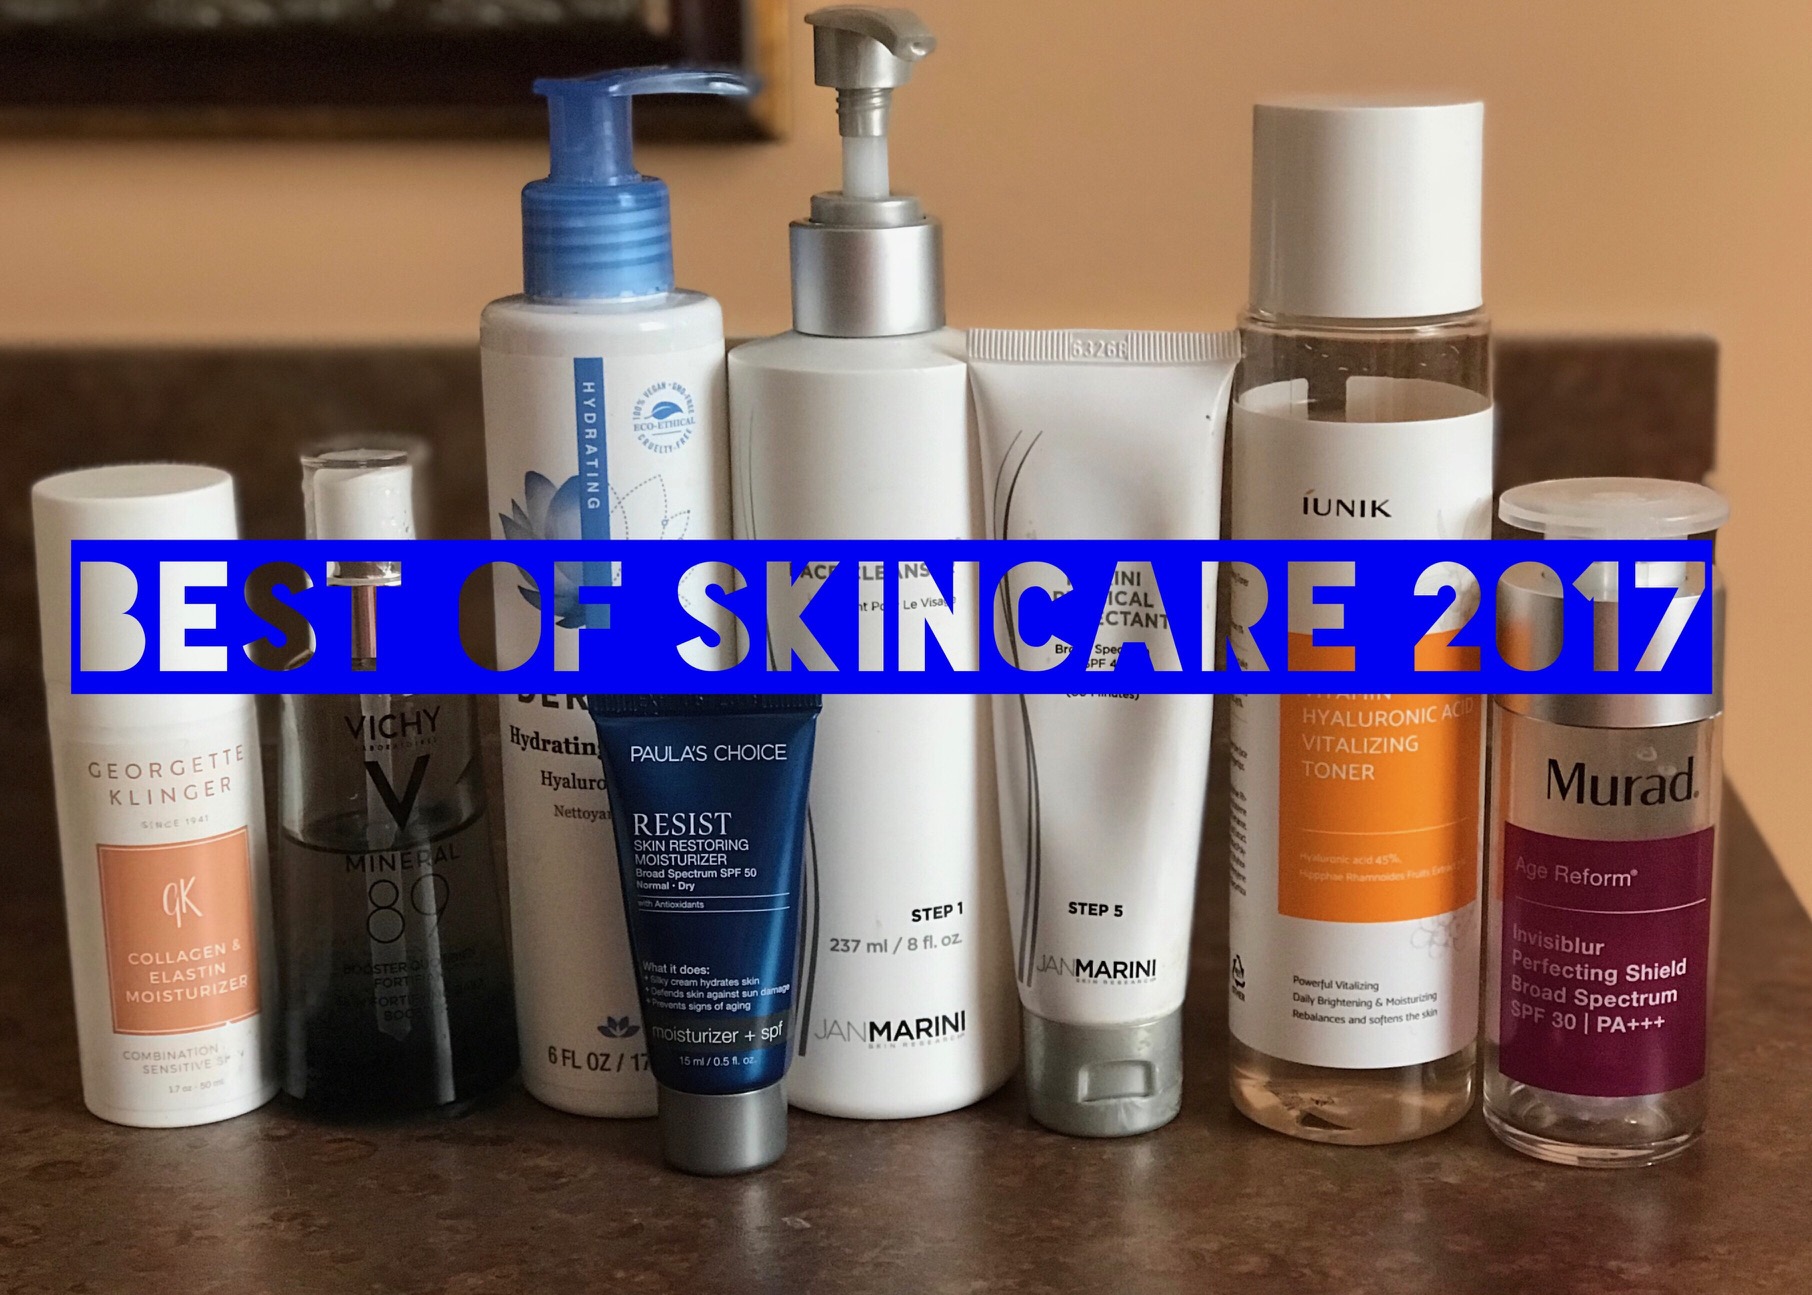 My Best of Facial Skincare for 2017, neversaydiebeauty.com